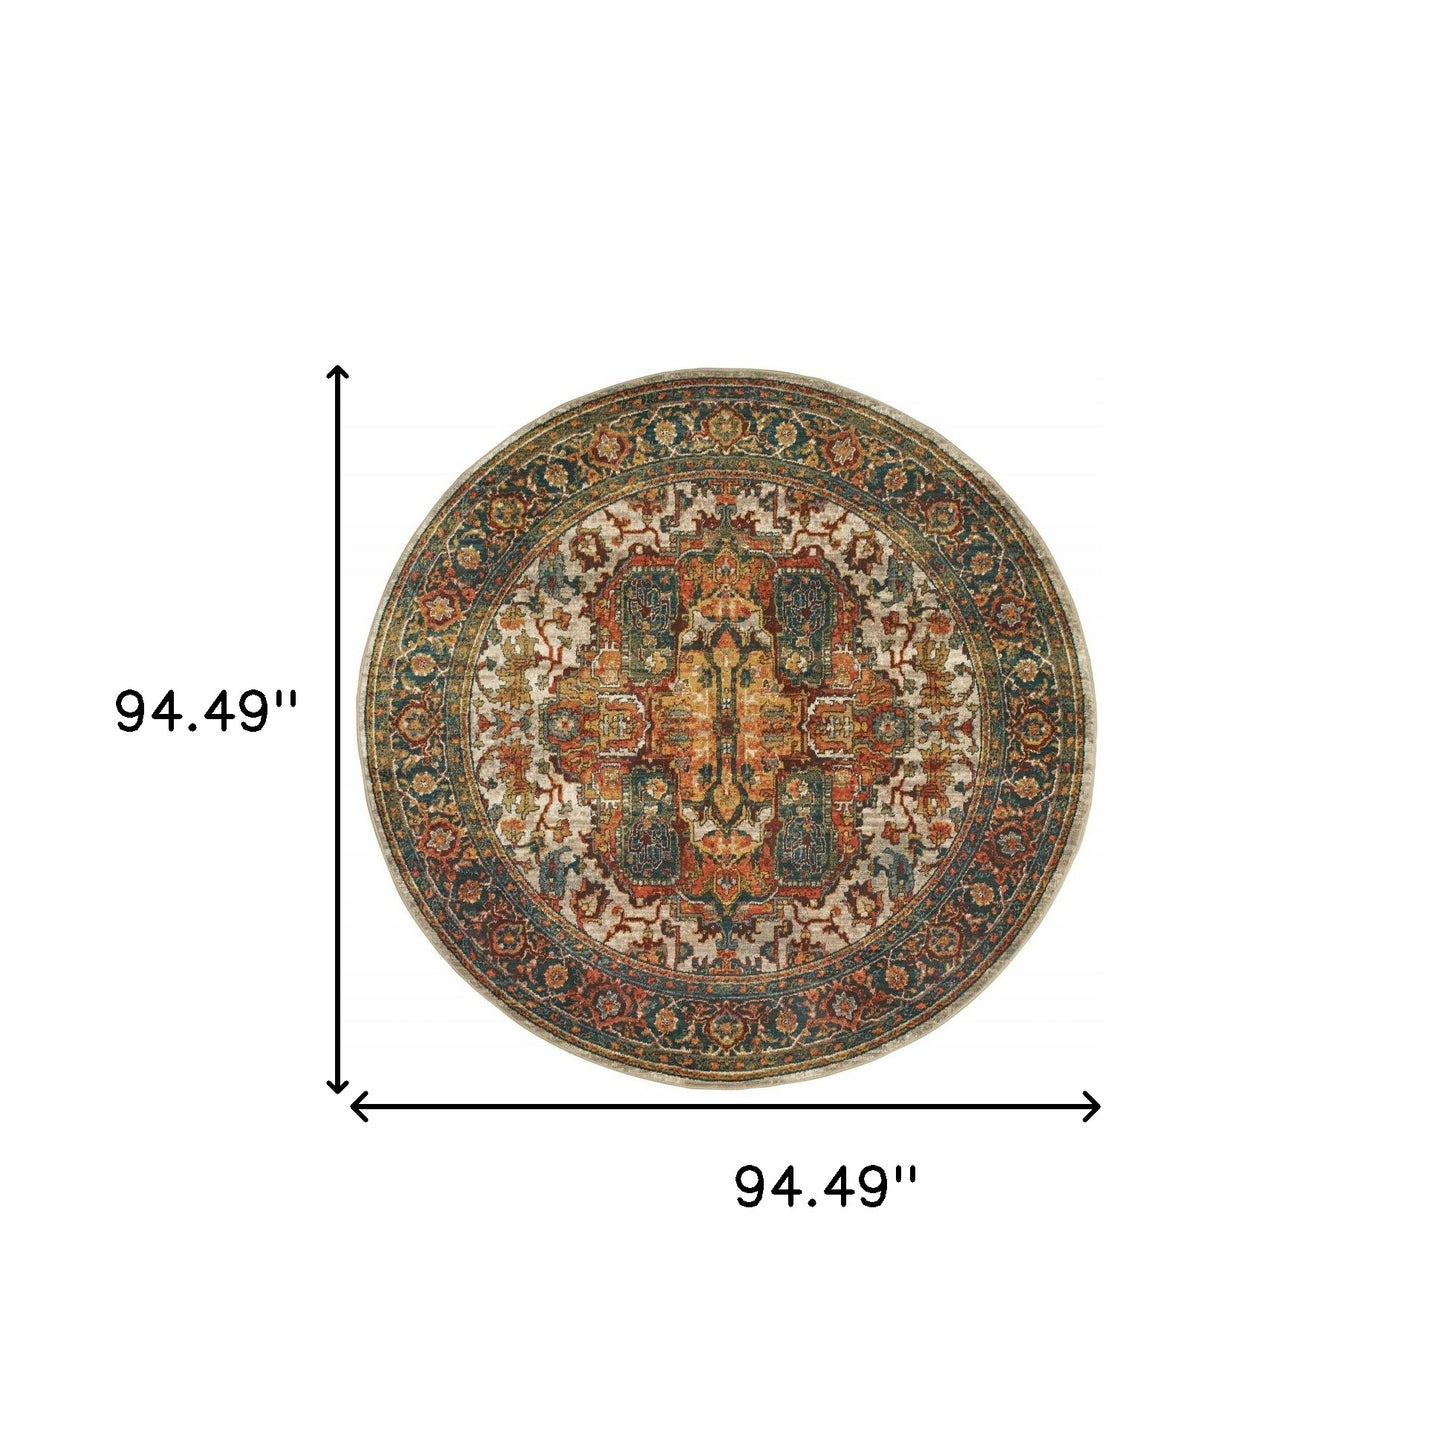 8' Red Gold Orange Green Ivory Rust And Blue Round Oriental Power Loom Stain Resistant Area Rug